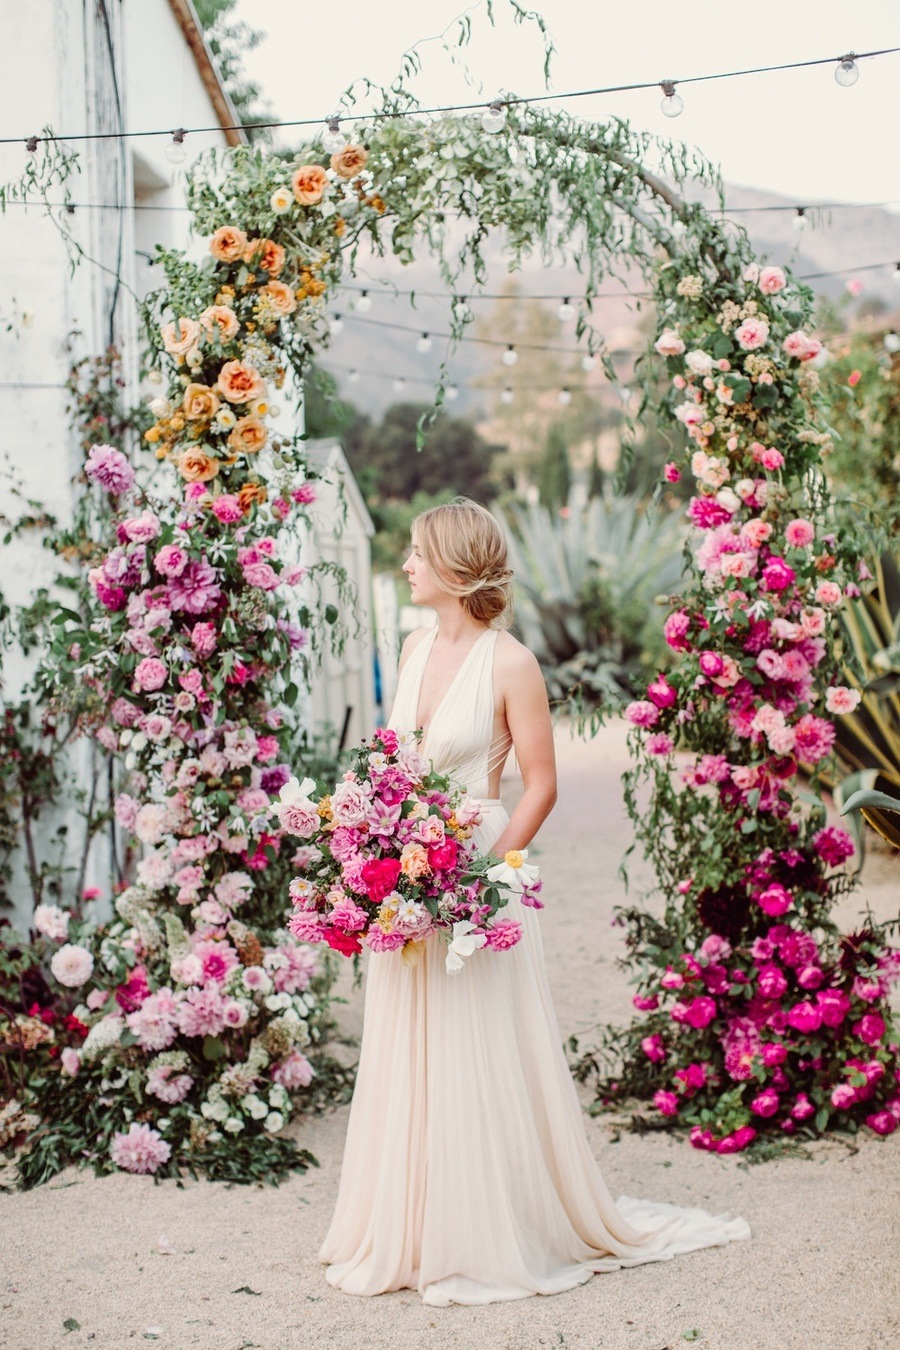 Cheerful Wedding Ombre Flower Arch 01